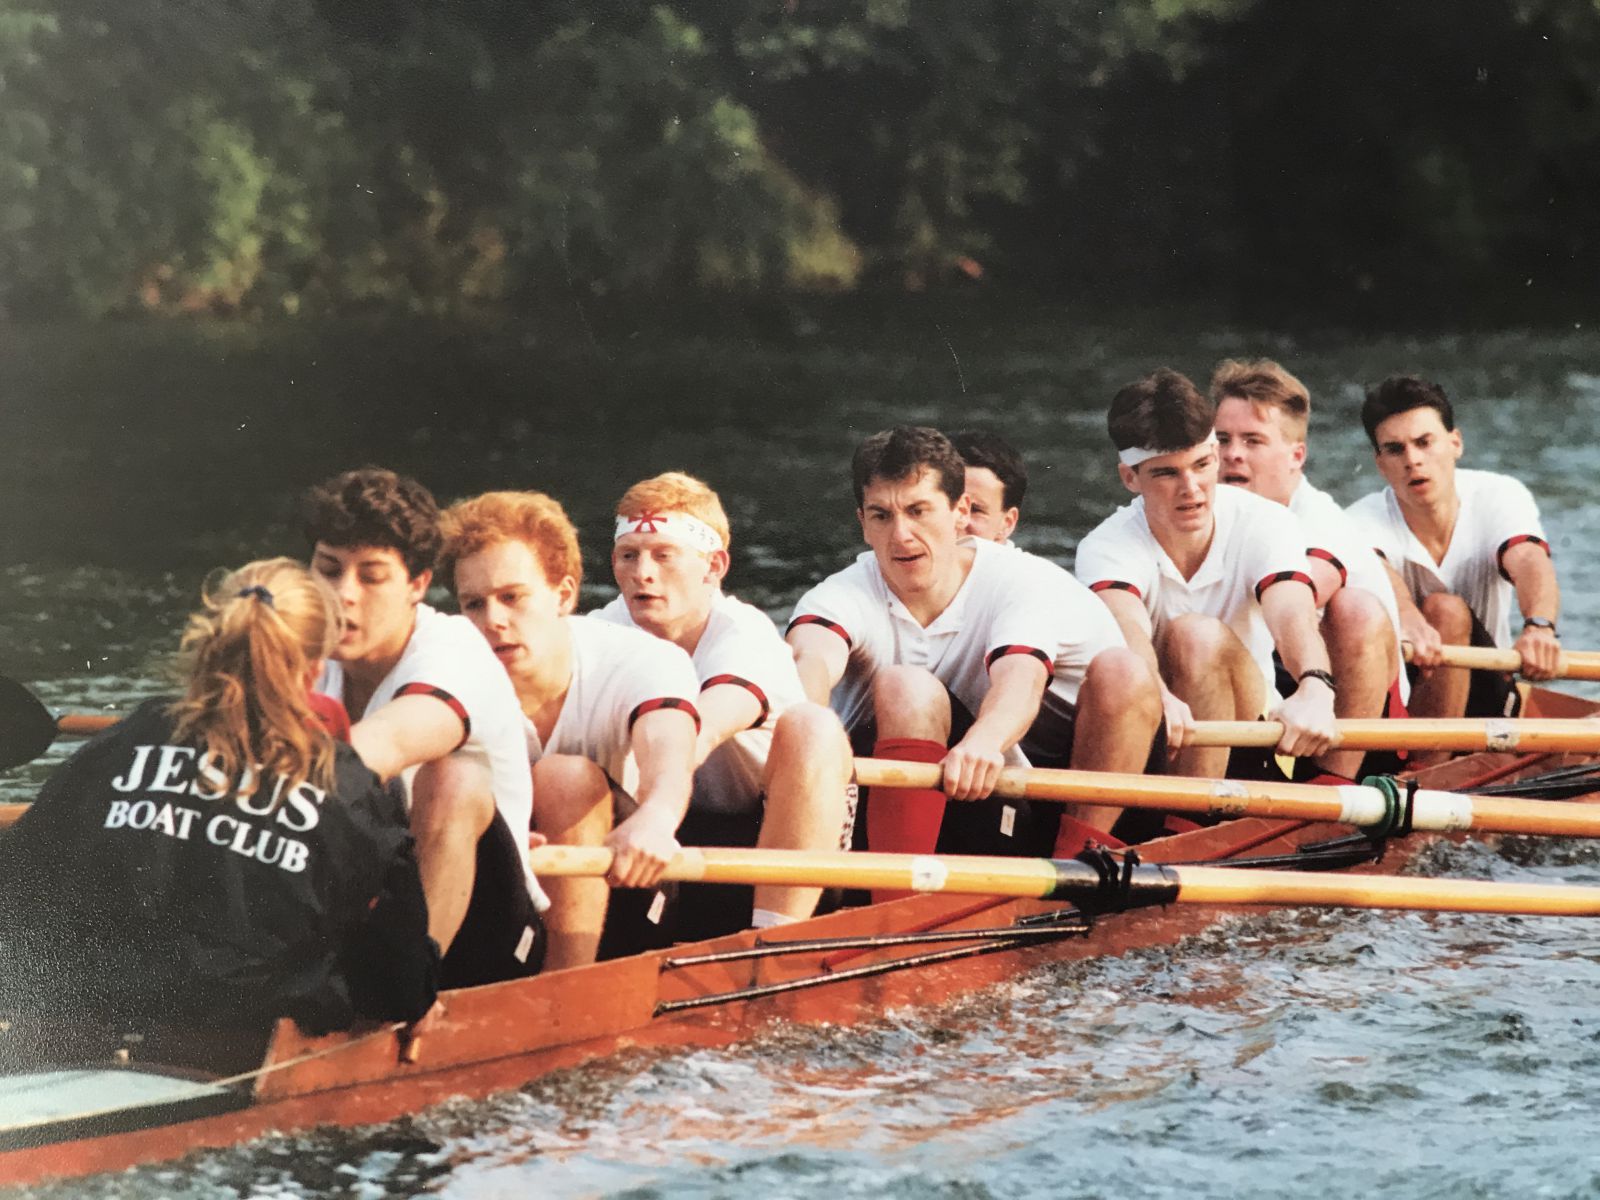 Richard is the third rower from the left